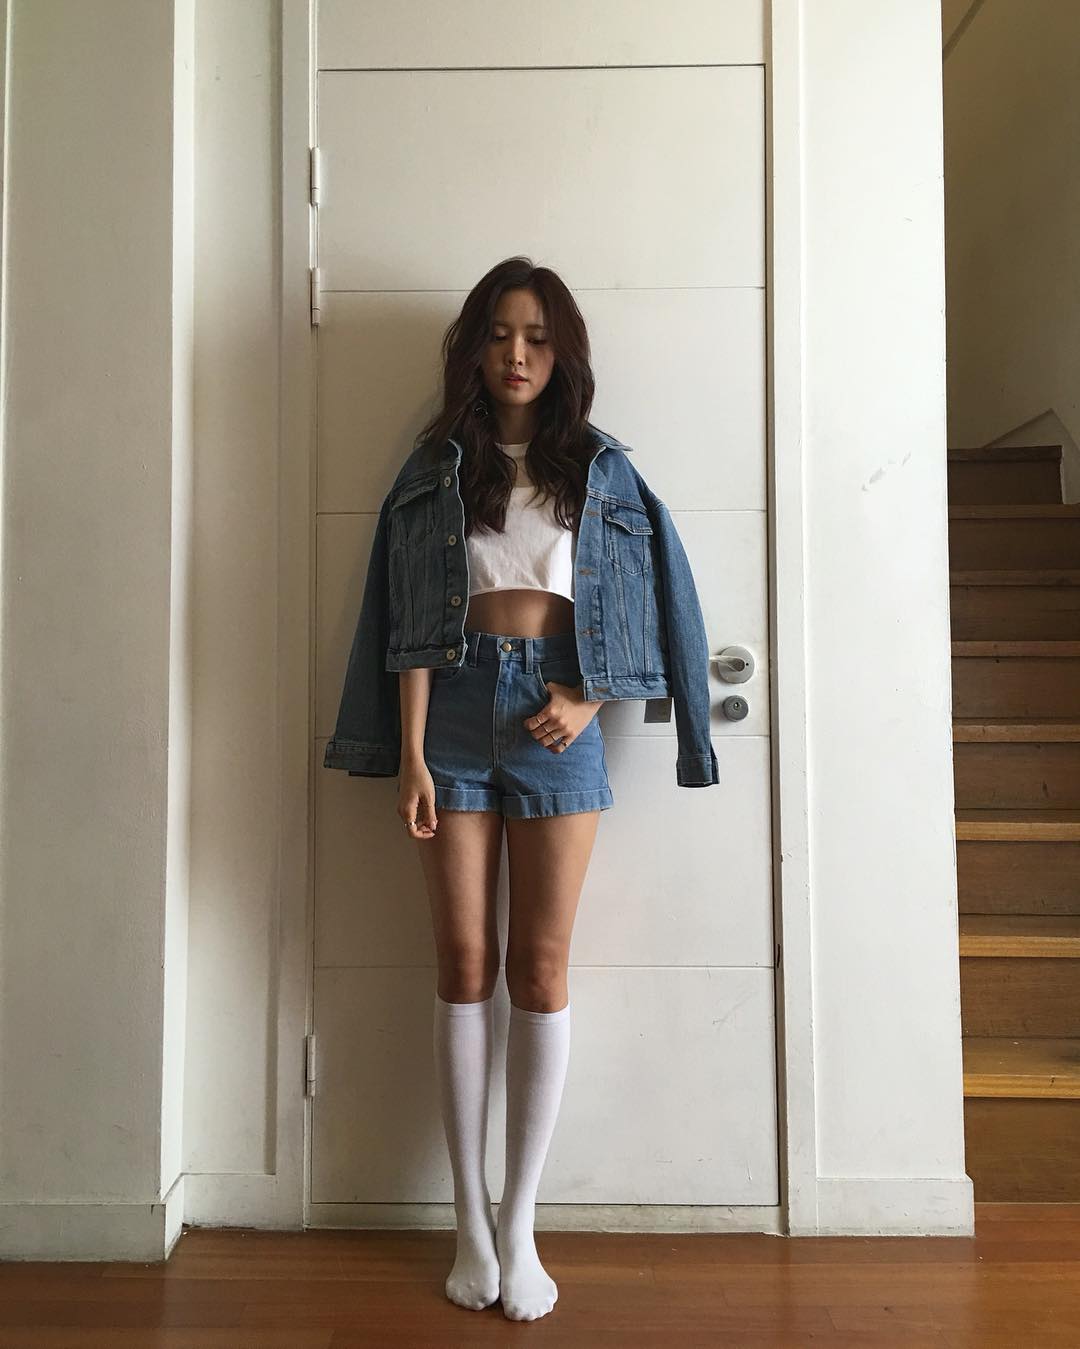 Naeun shows off her slim figure in this simple but eyecatching outfit.